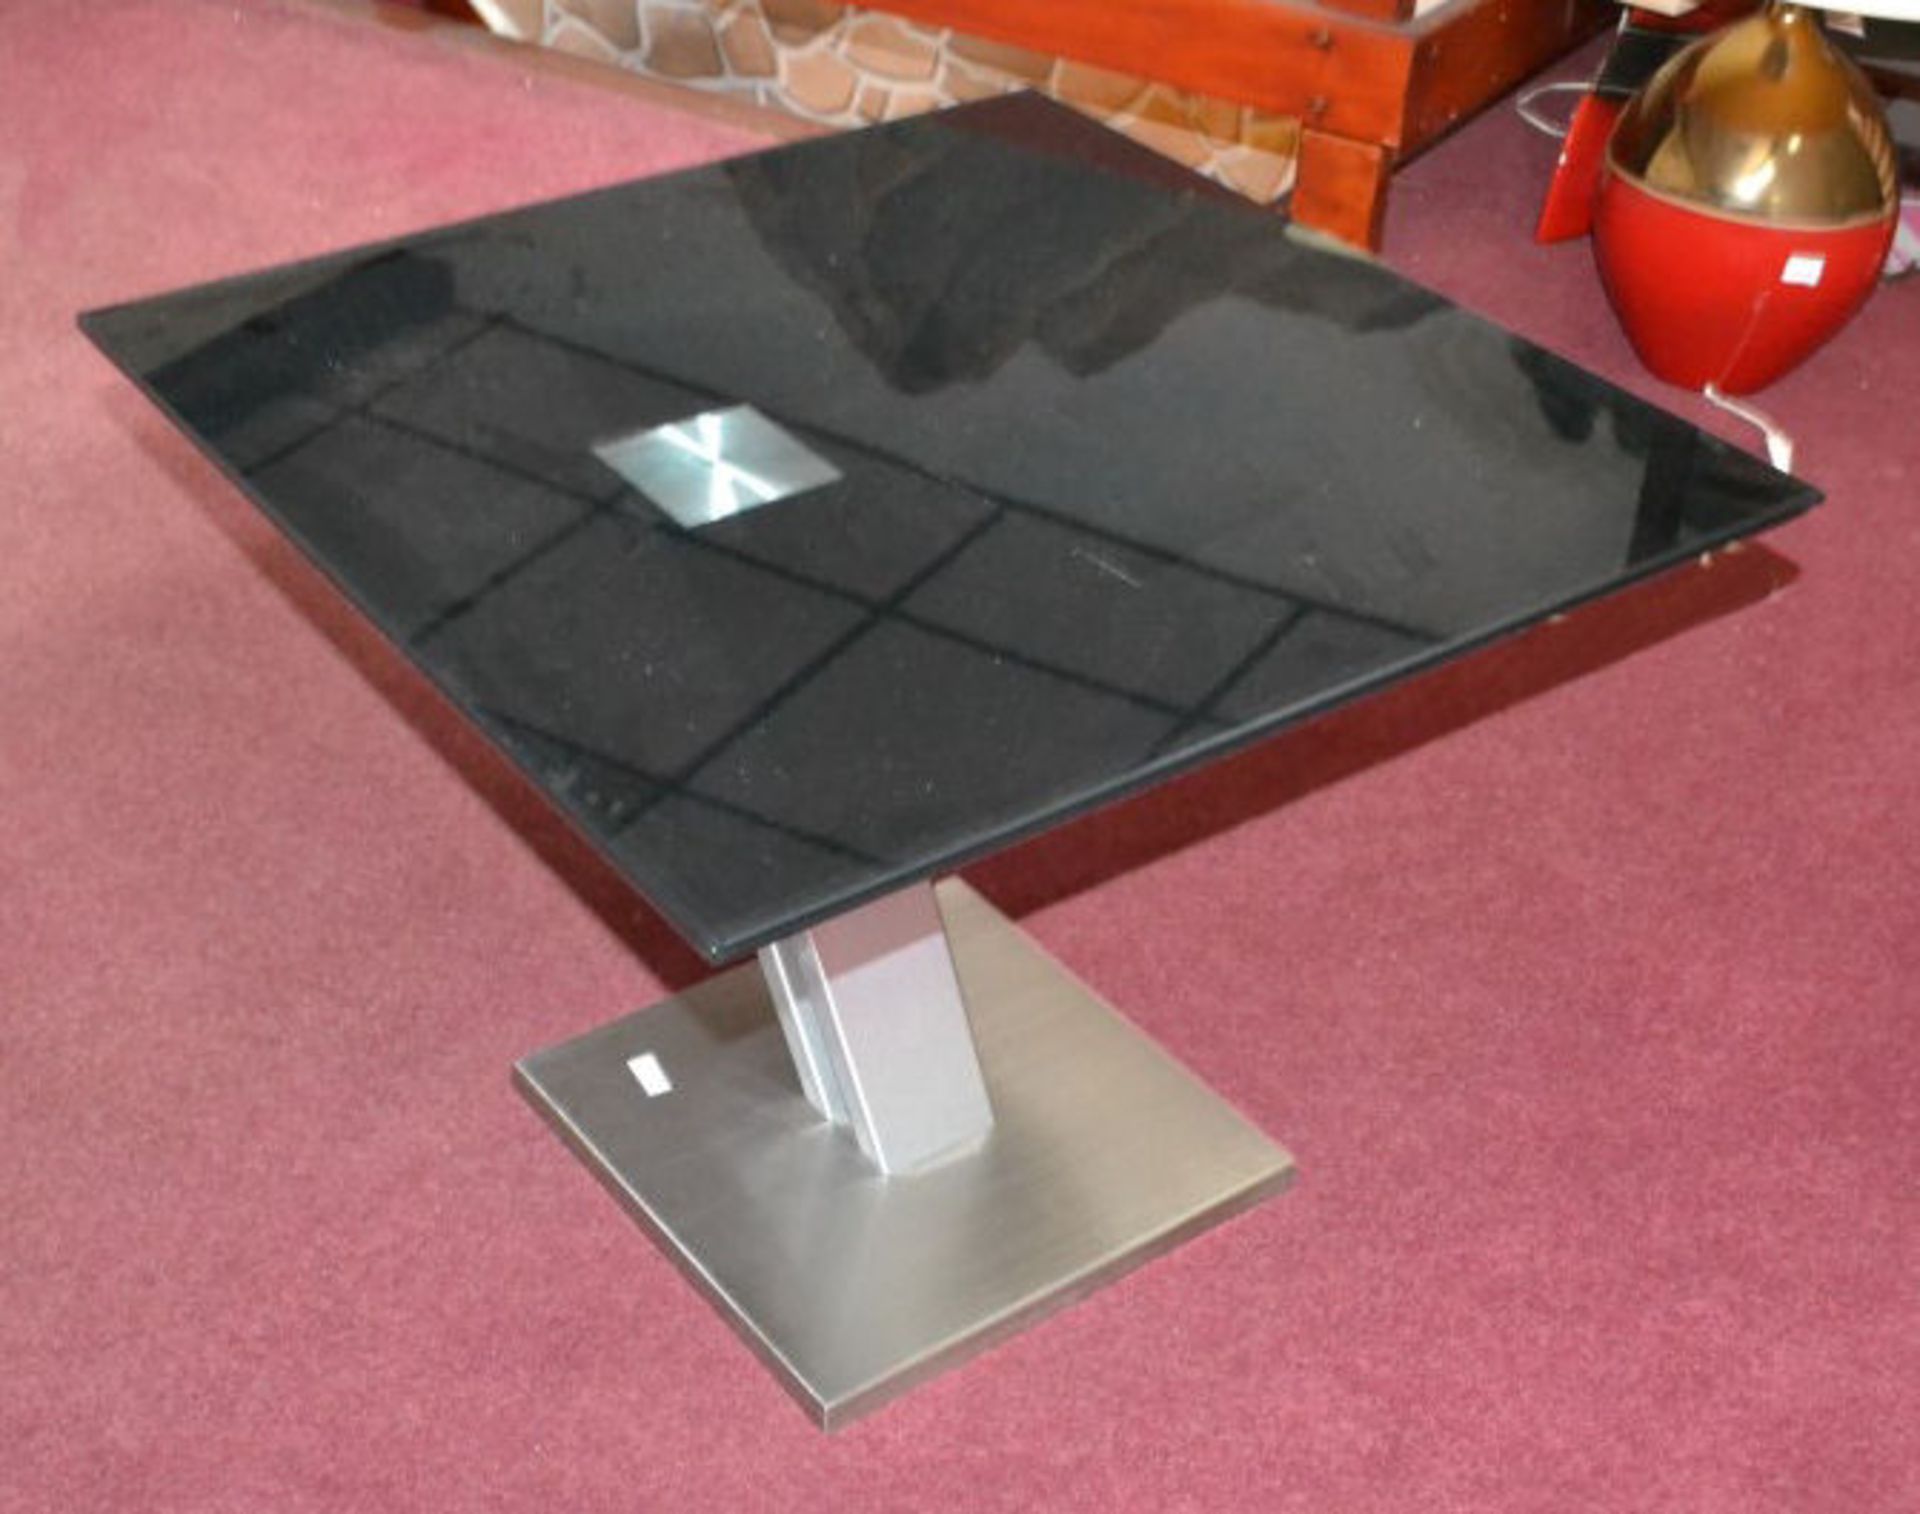 1 x Contemporary Square Black Glass End Table - Image 3 of 4